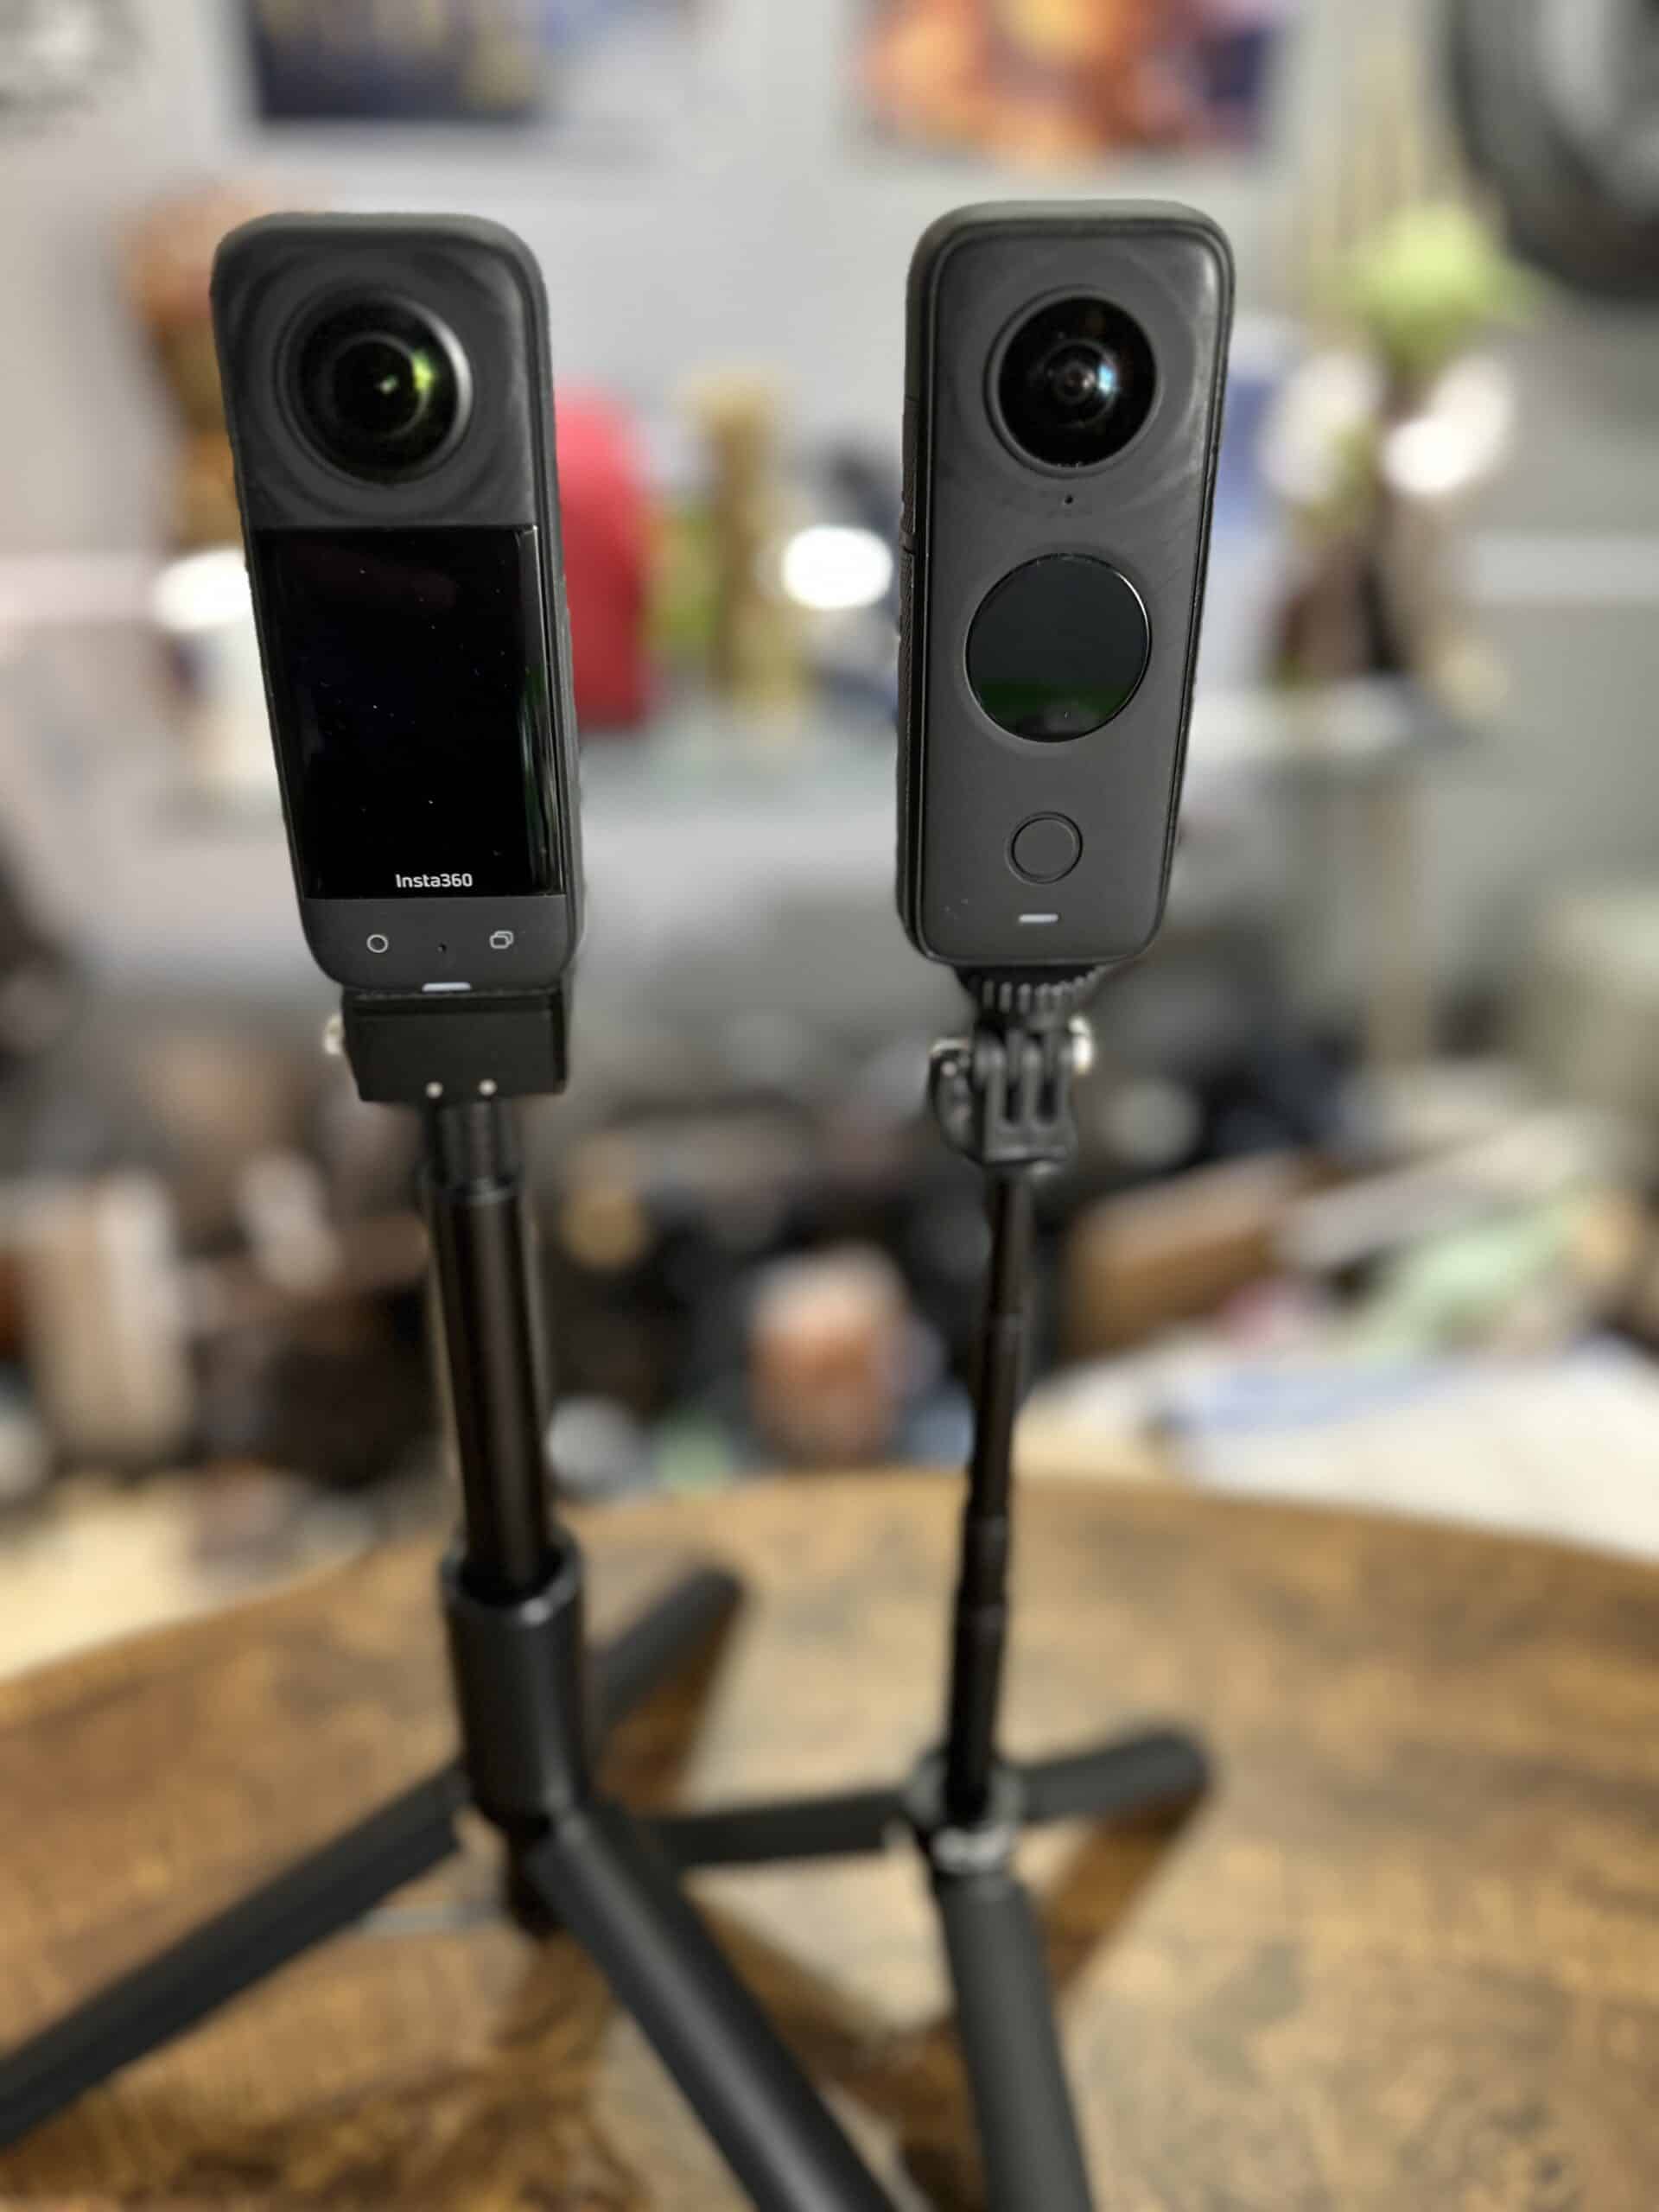 insta360 x2 and x3 360 cameras on invisible selfie sticks and tripods: 2 in 1 selfie stick and the mini selfie stick and tripod